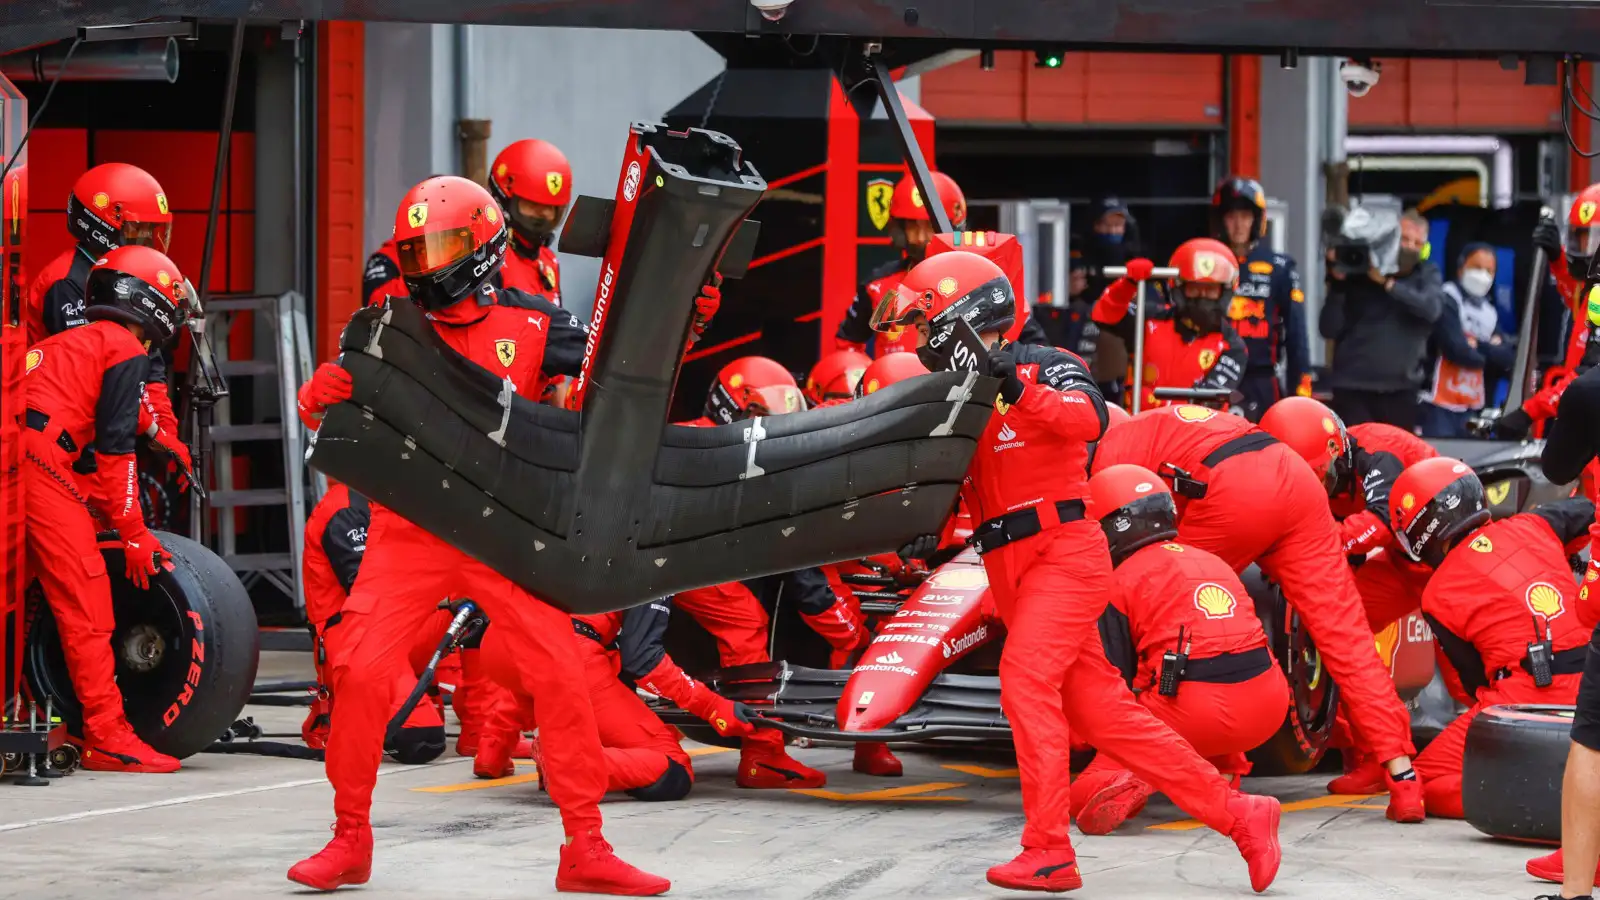 Charles Leclerc received a new front wing. Imola April 2022